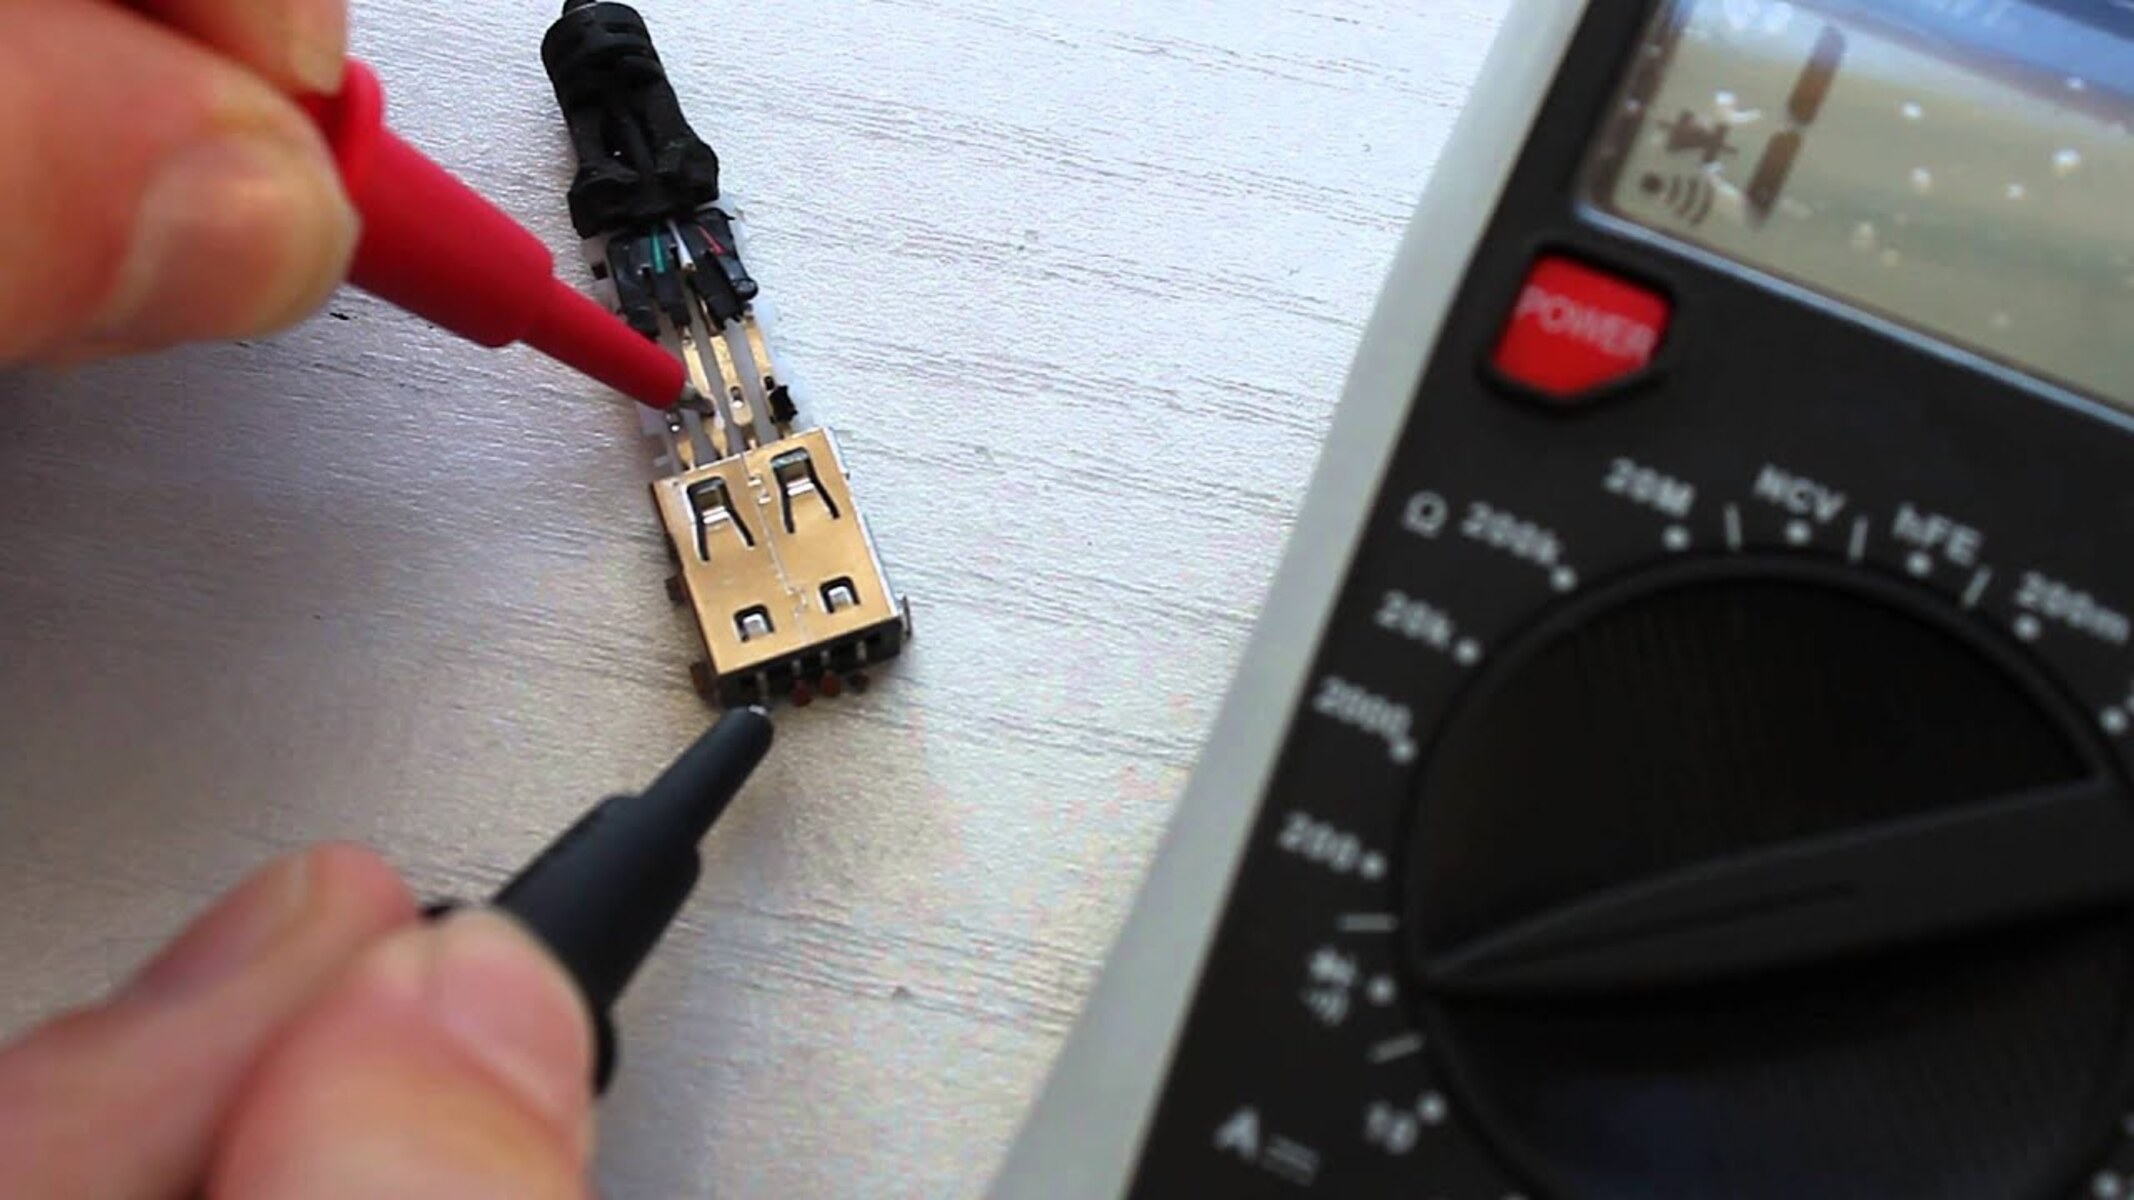 Testing USB Chargers With A Multimeter: Step-by-Step Instructions